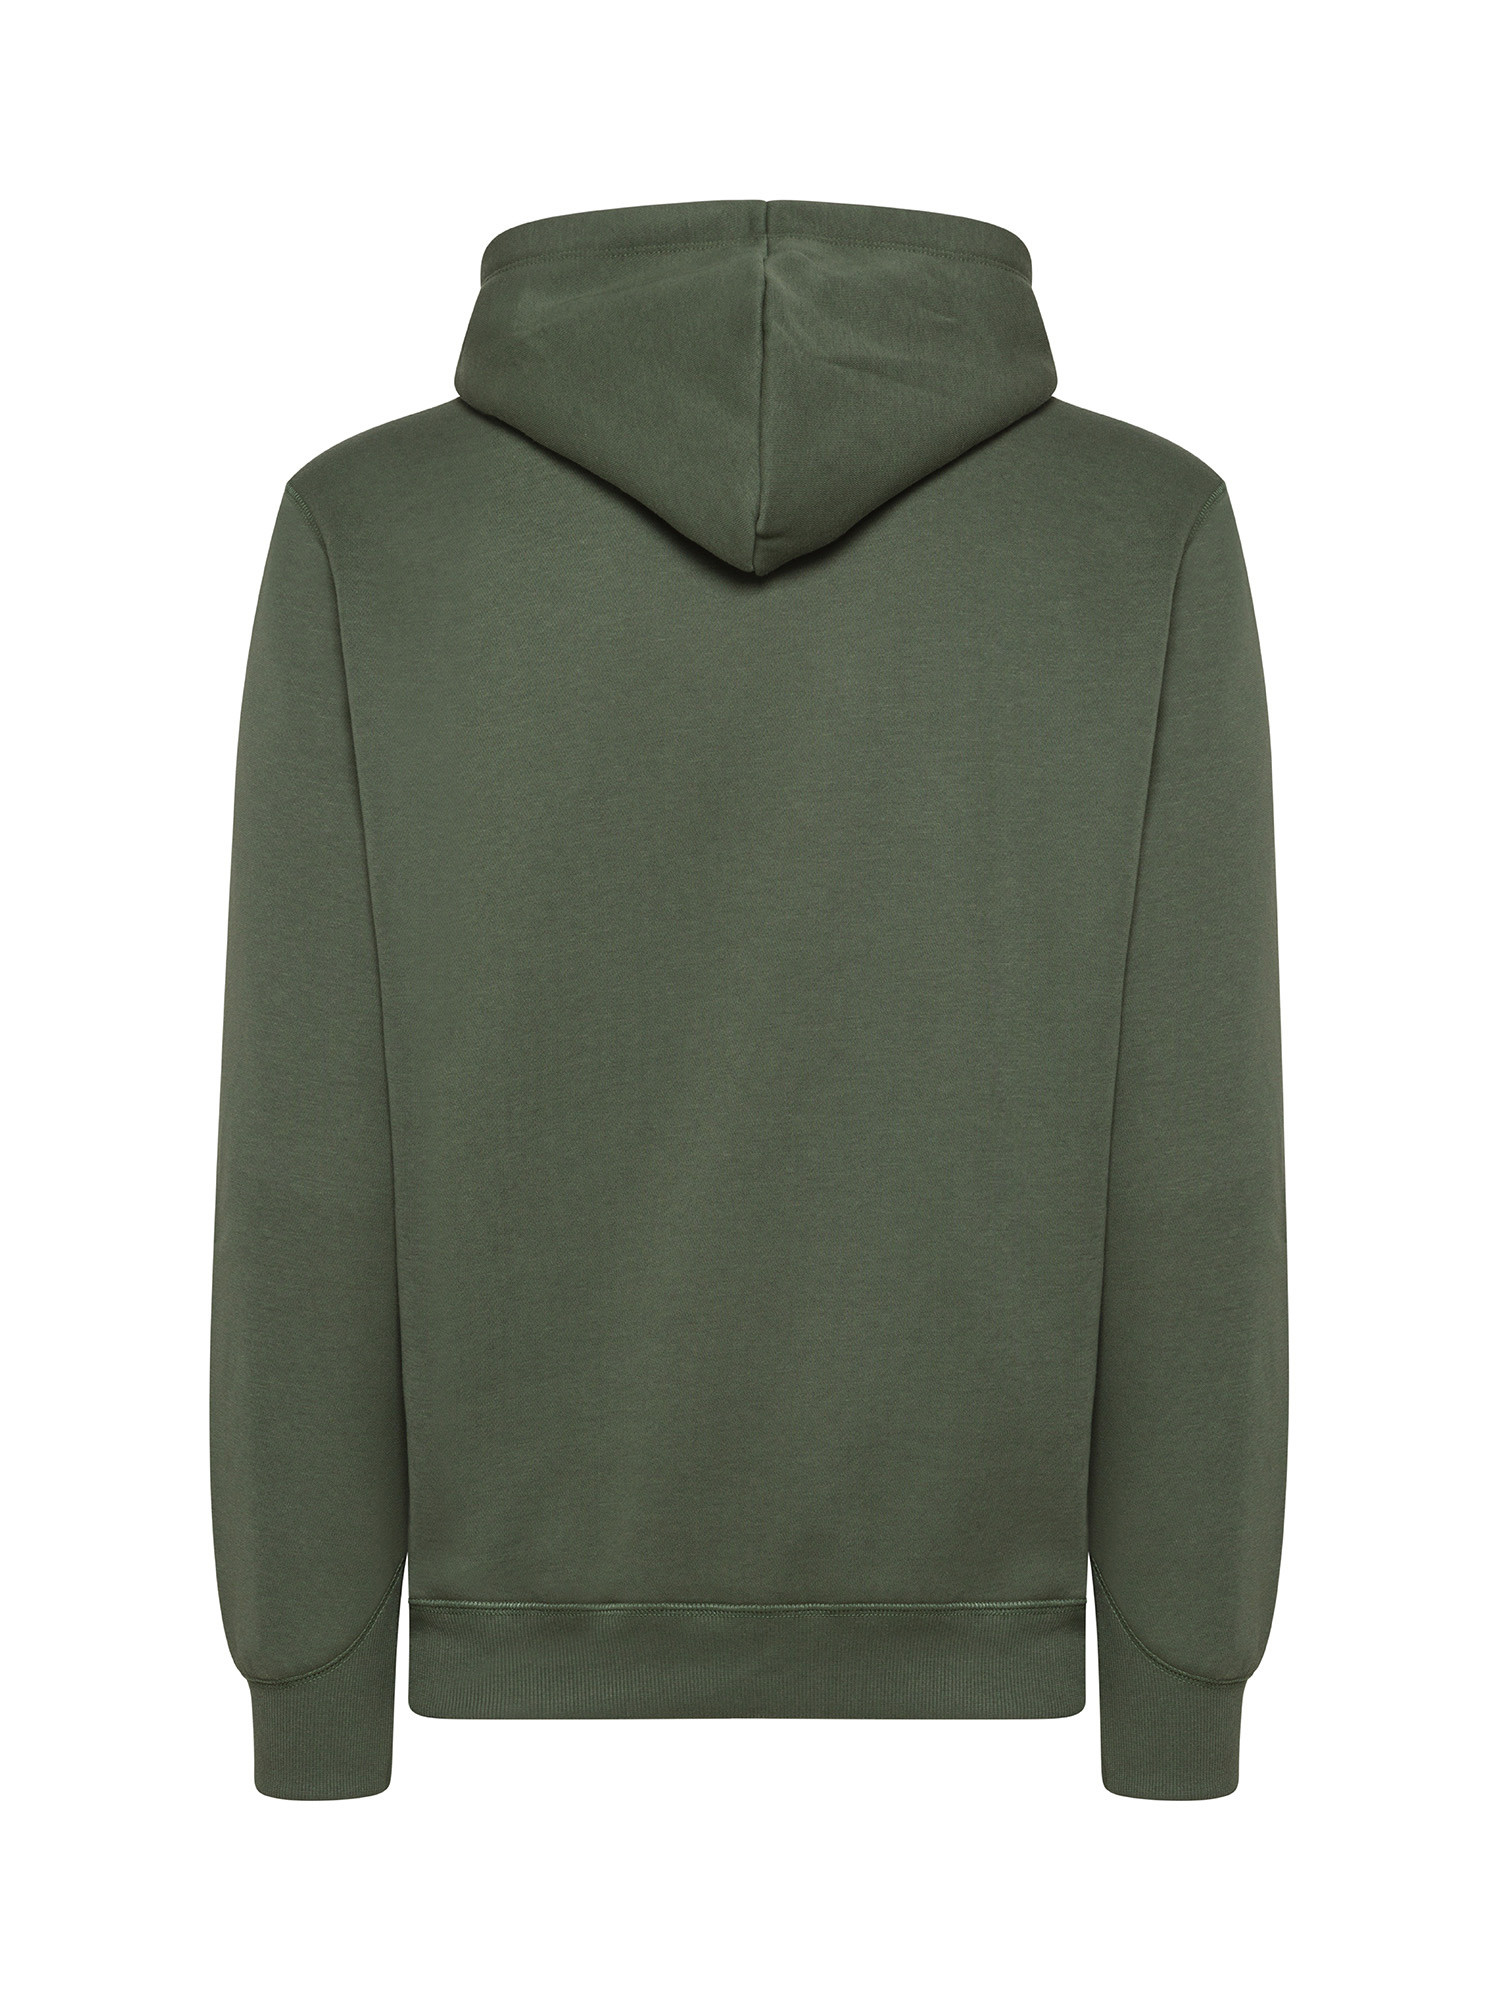 G-Star - Hooded sweatshirt with logo embroidery, Olive Green, large image number 1